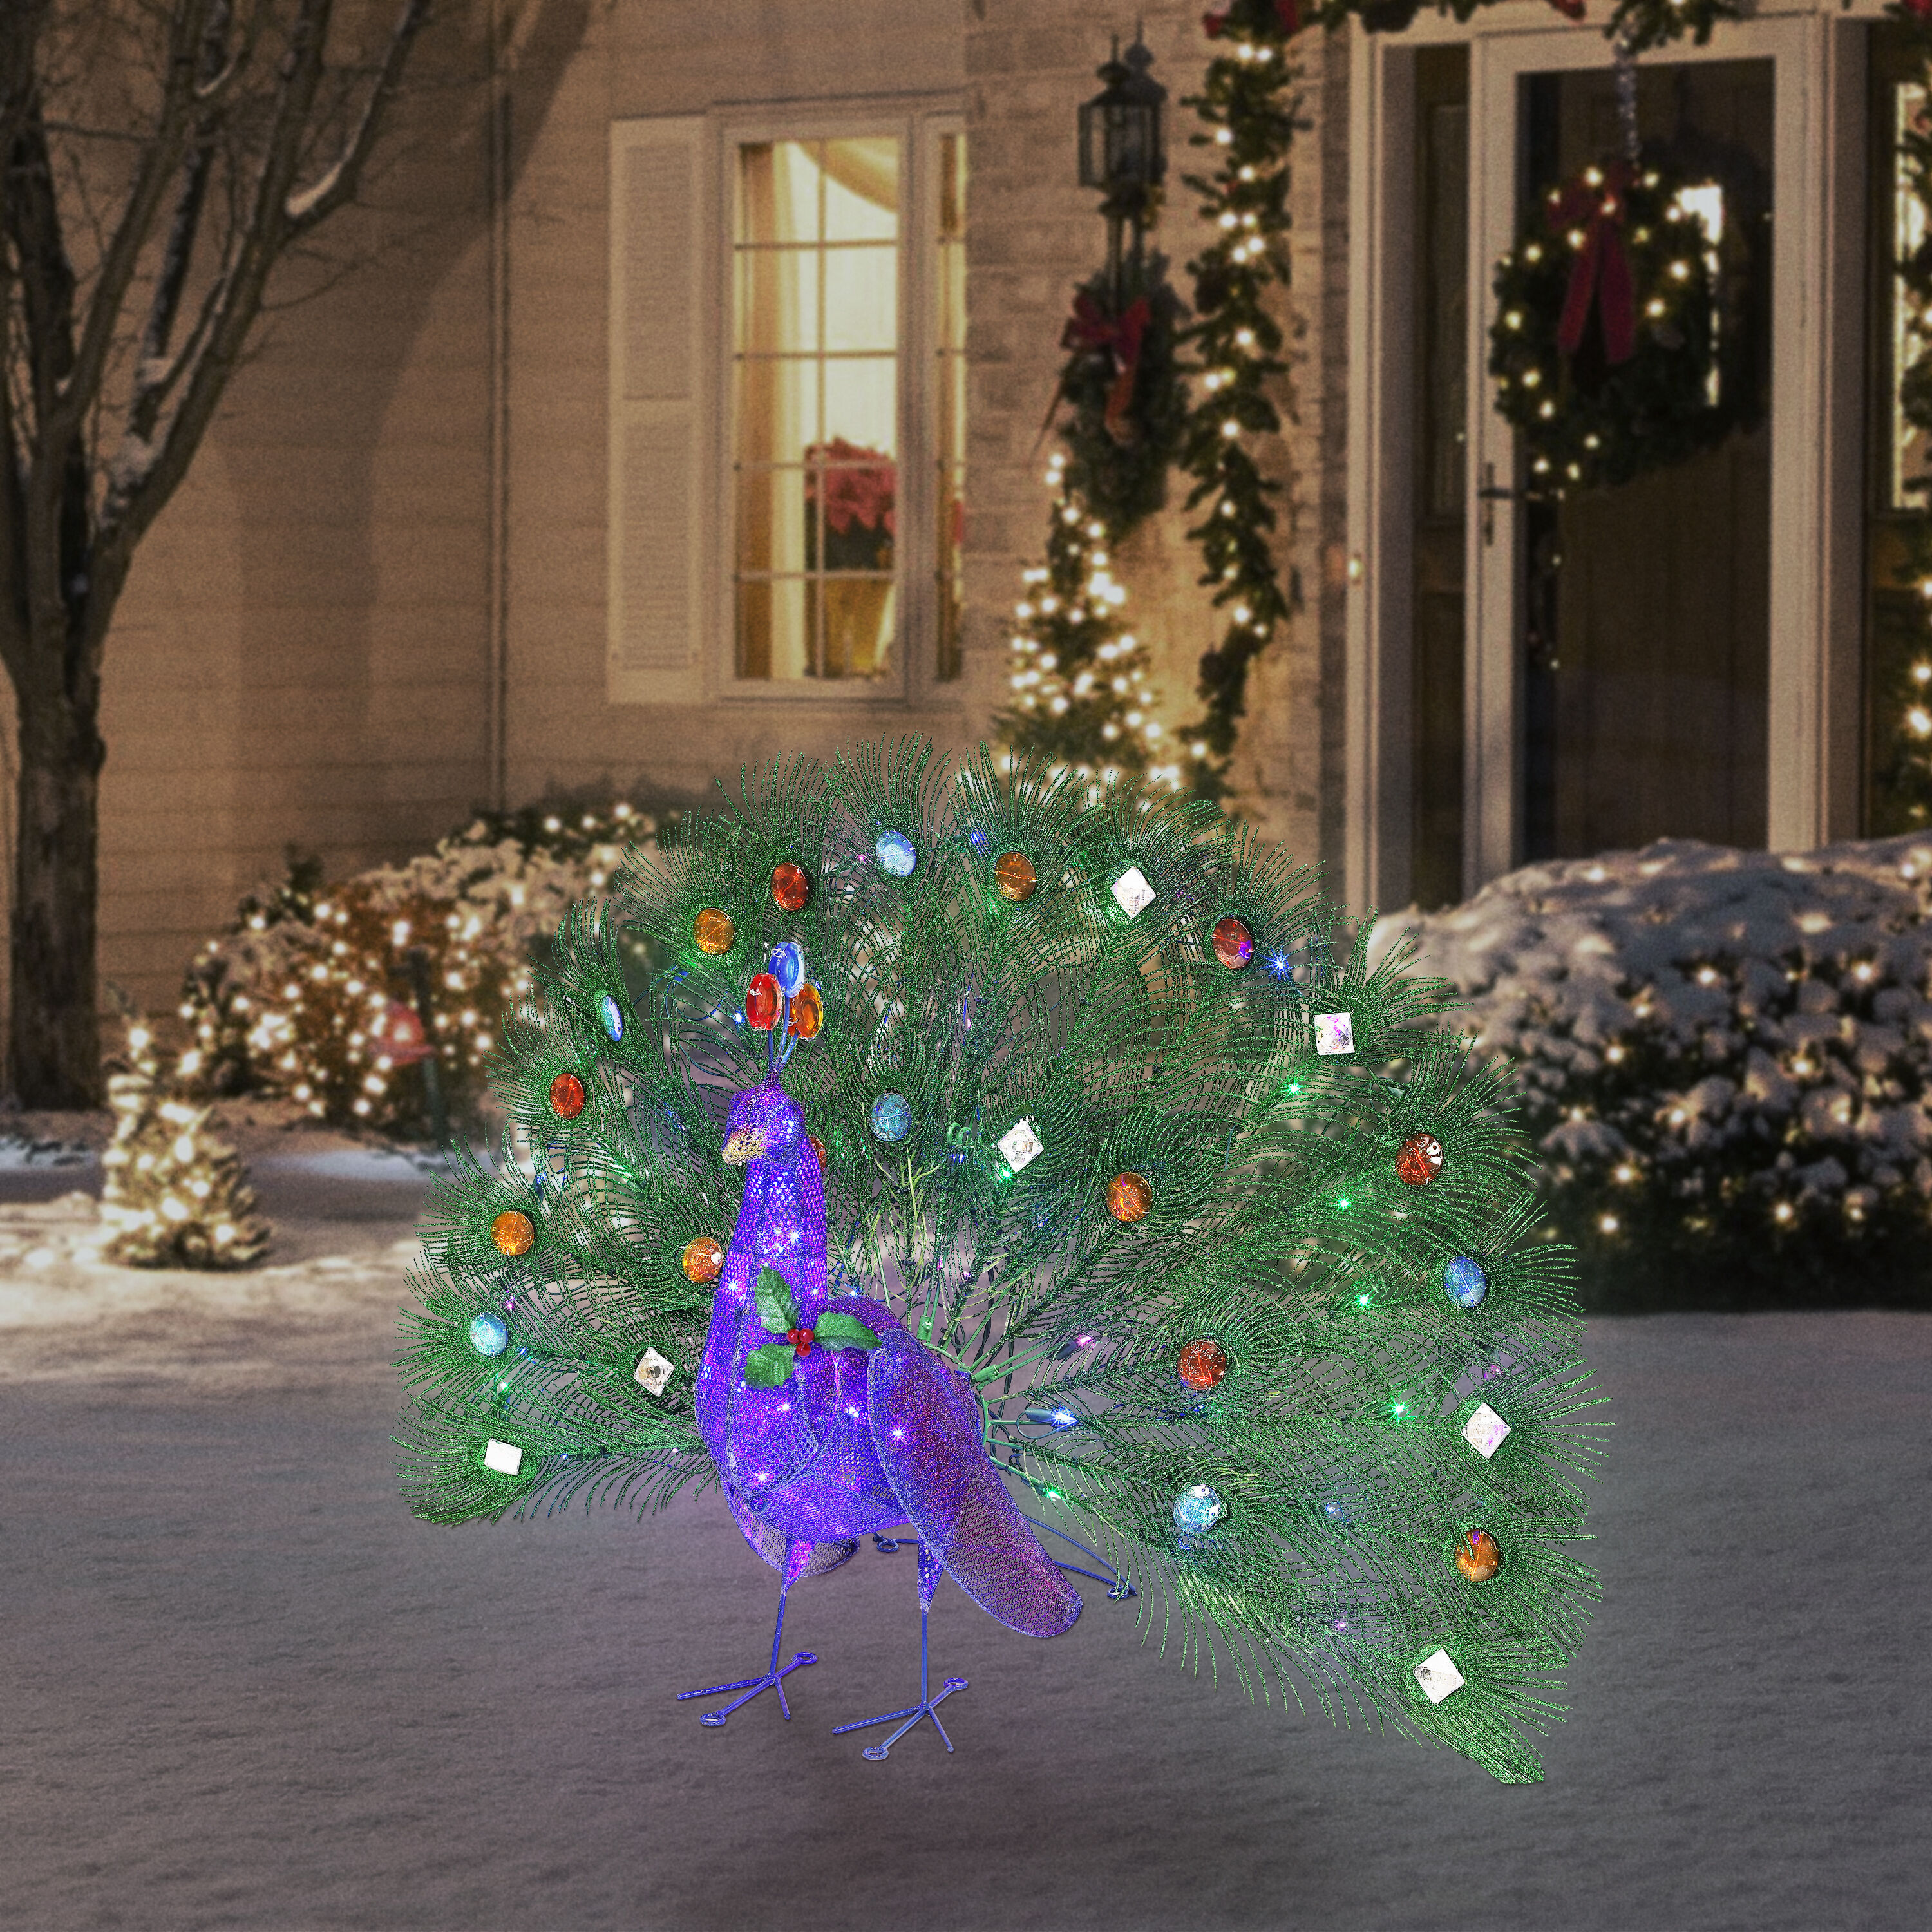 Northlight 19 Colorful Green Regal Peacock Bird with Closed Tail Feathers Christmas Decoration